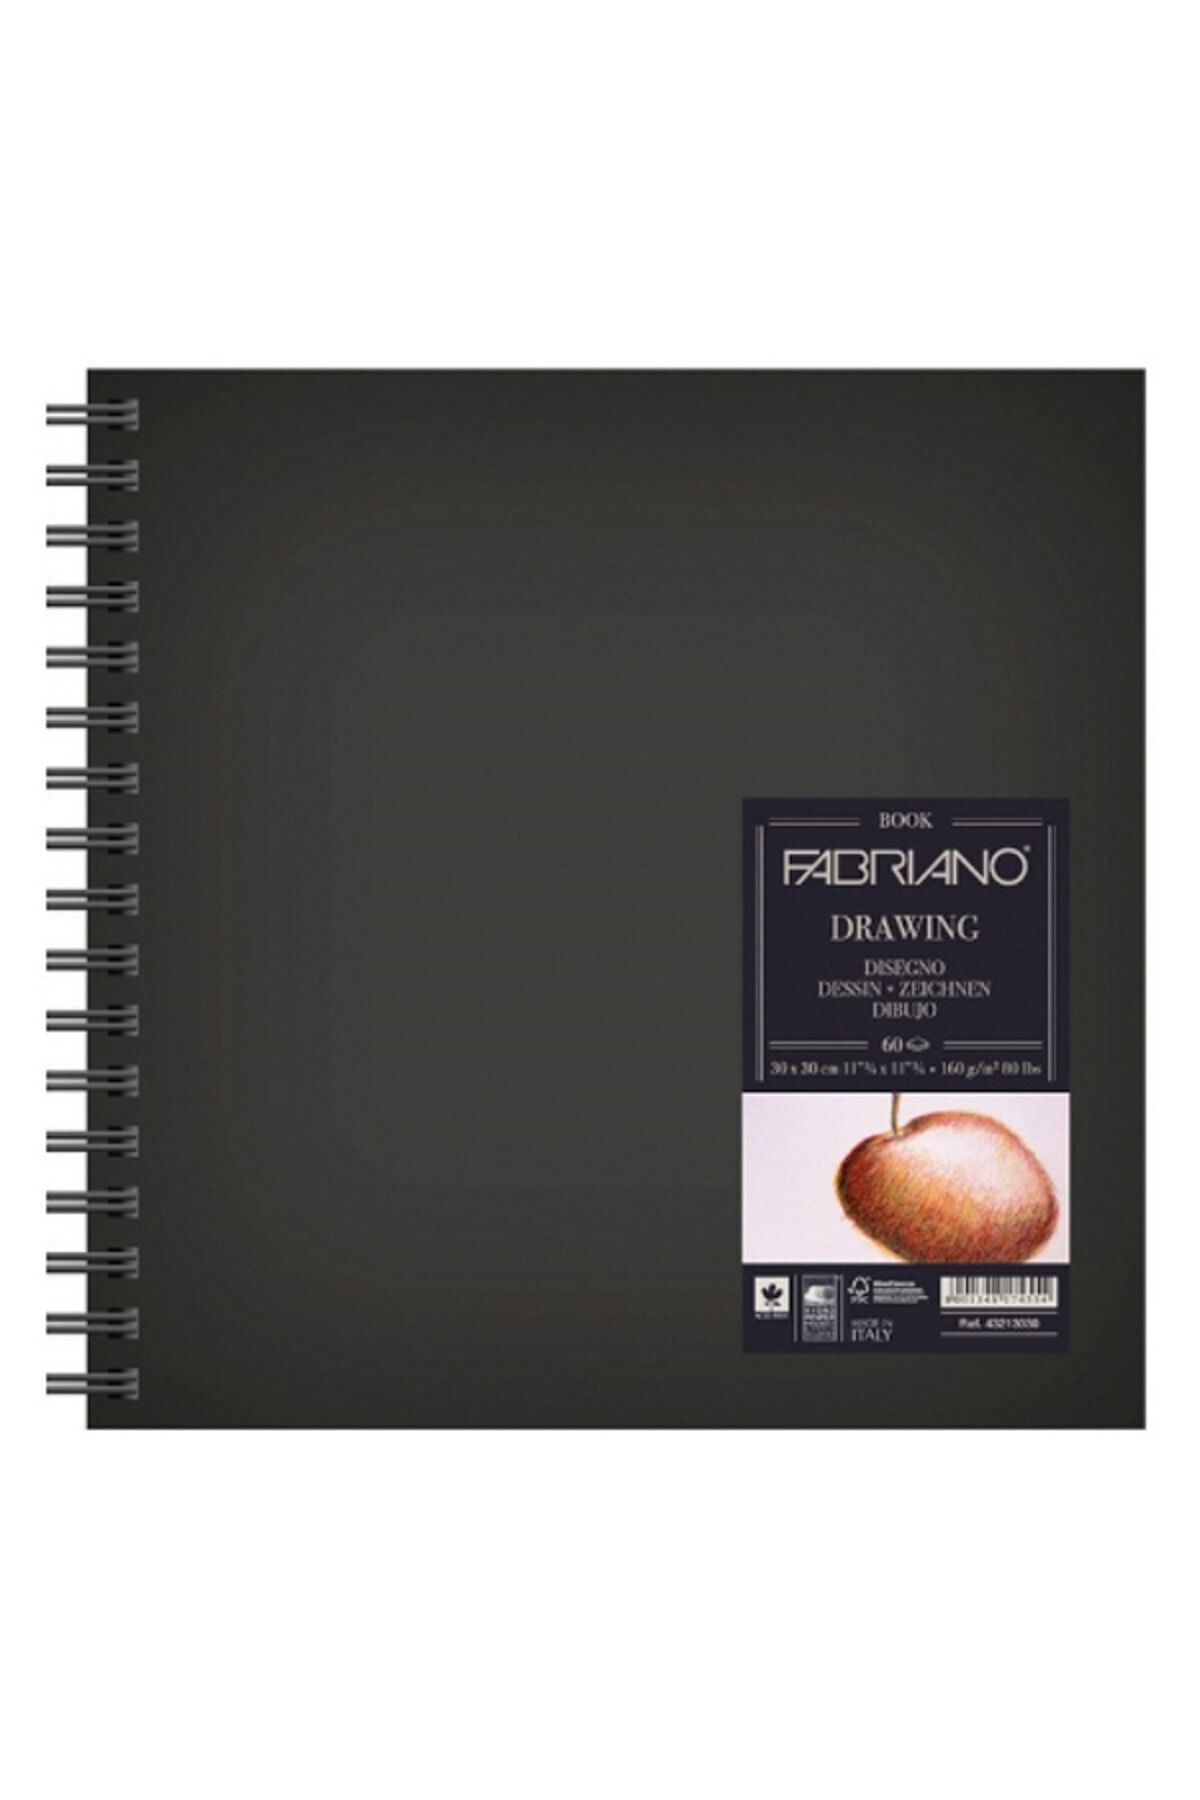 Fabriano Drawing Book Natural Dokulu, 160gr, 30x30cm 225381